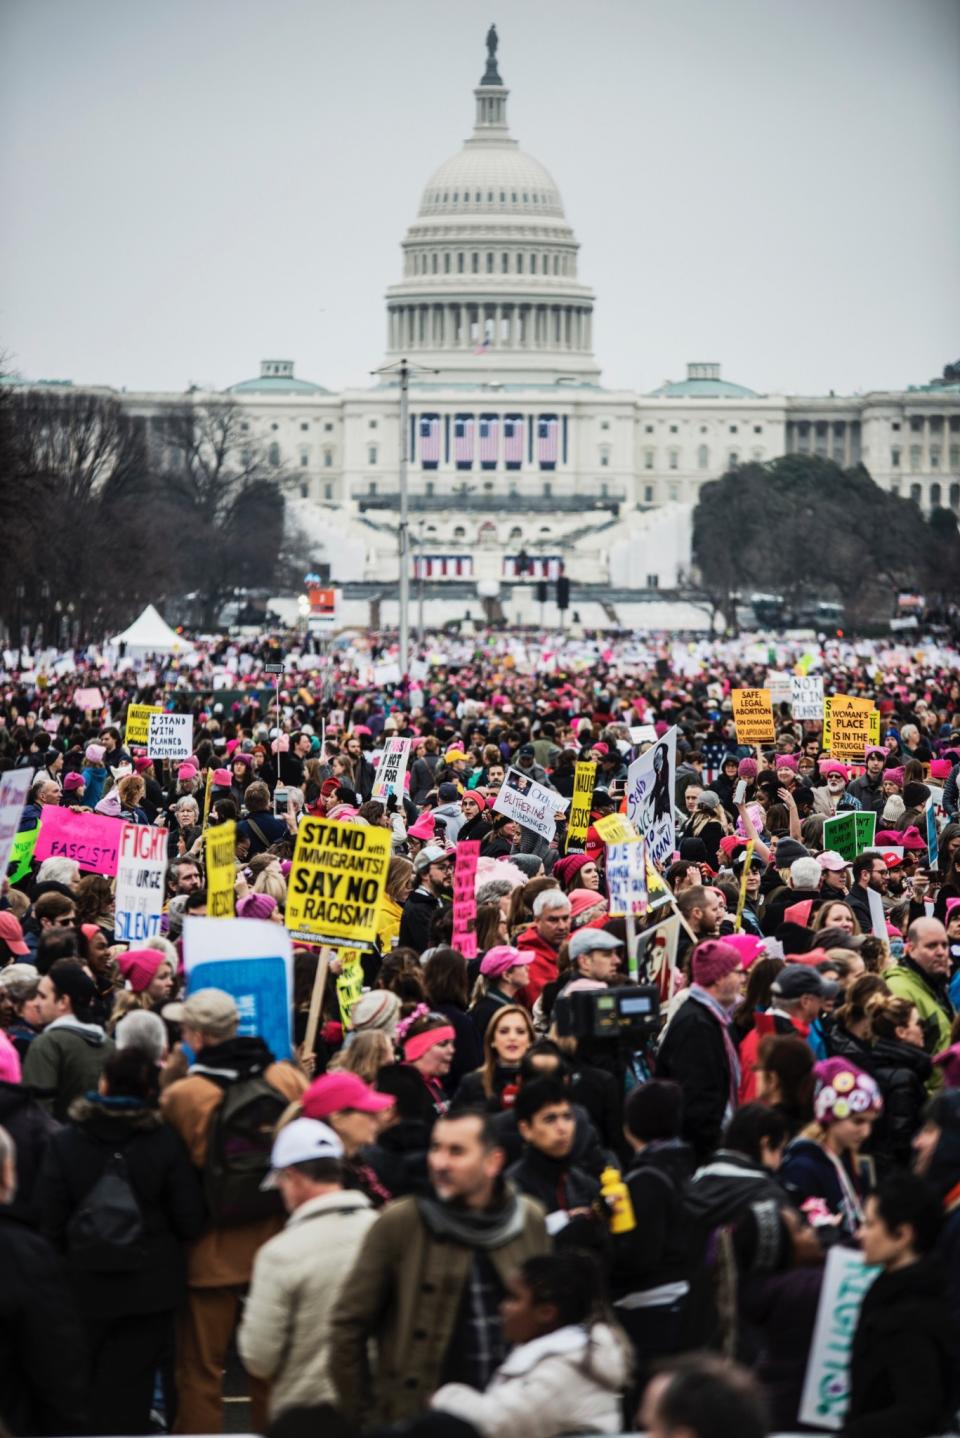 The scene in front of the U.S. Capitol during the Women’s March on Washington. (Photo: Joe Goldberg)